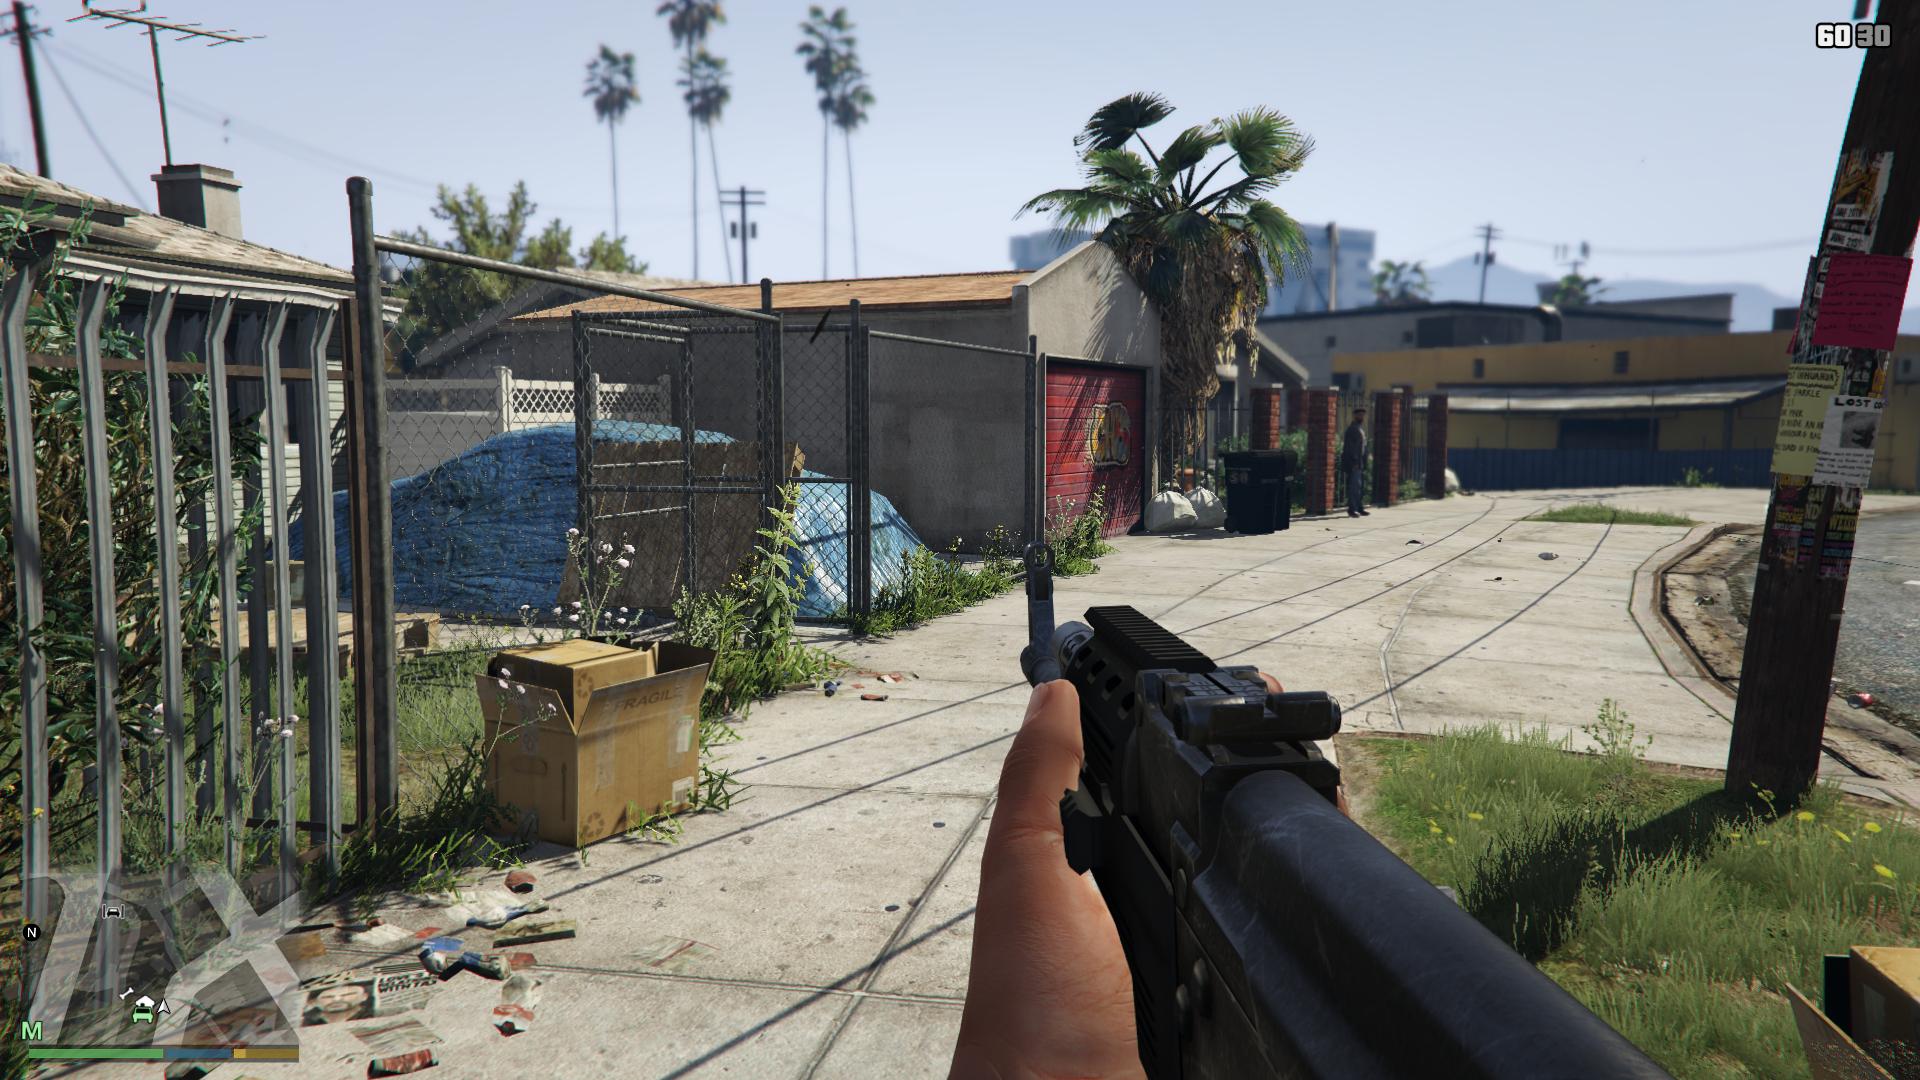 Download Now Grand Theft Auto 5 PC Mod to Change Field of View (FoV)